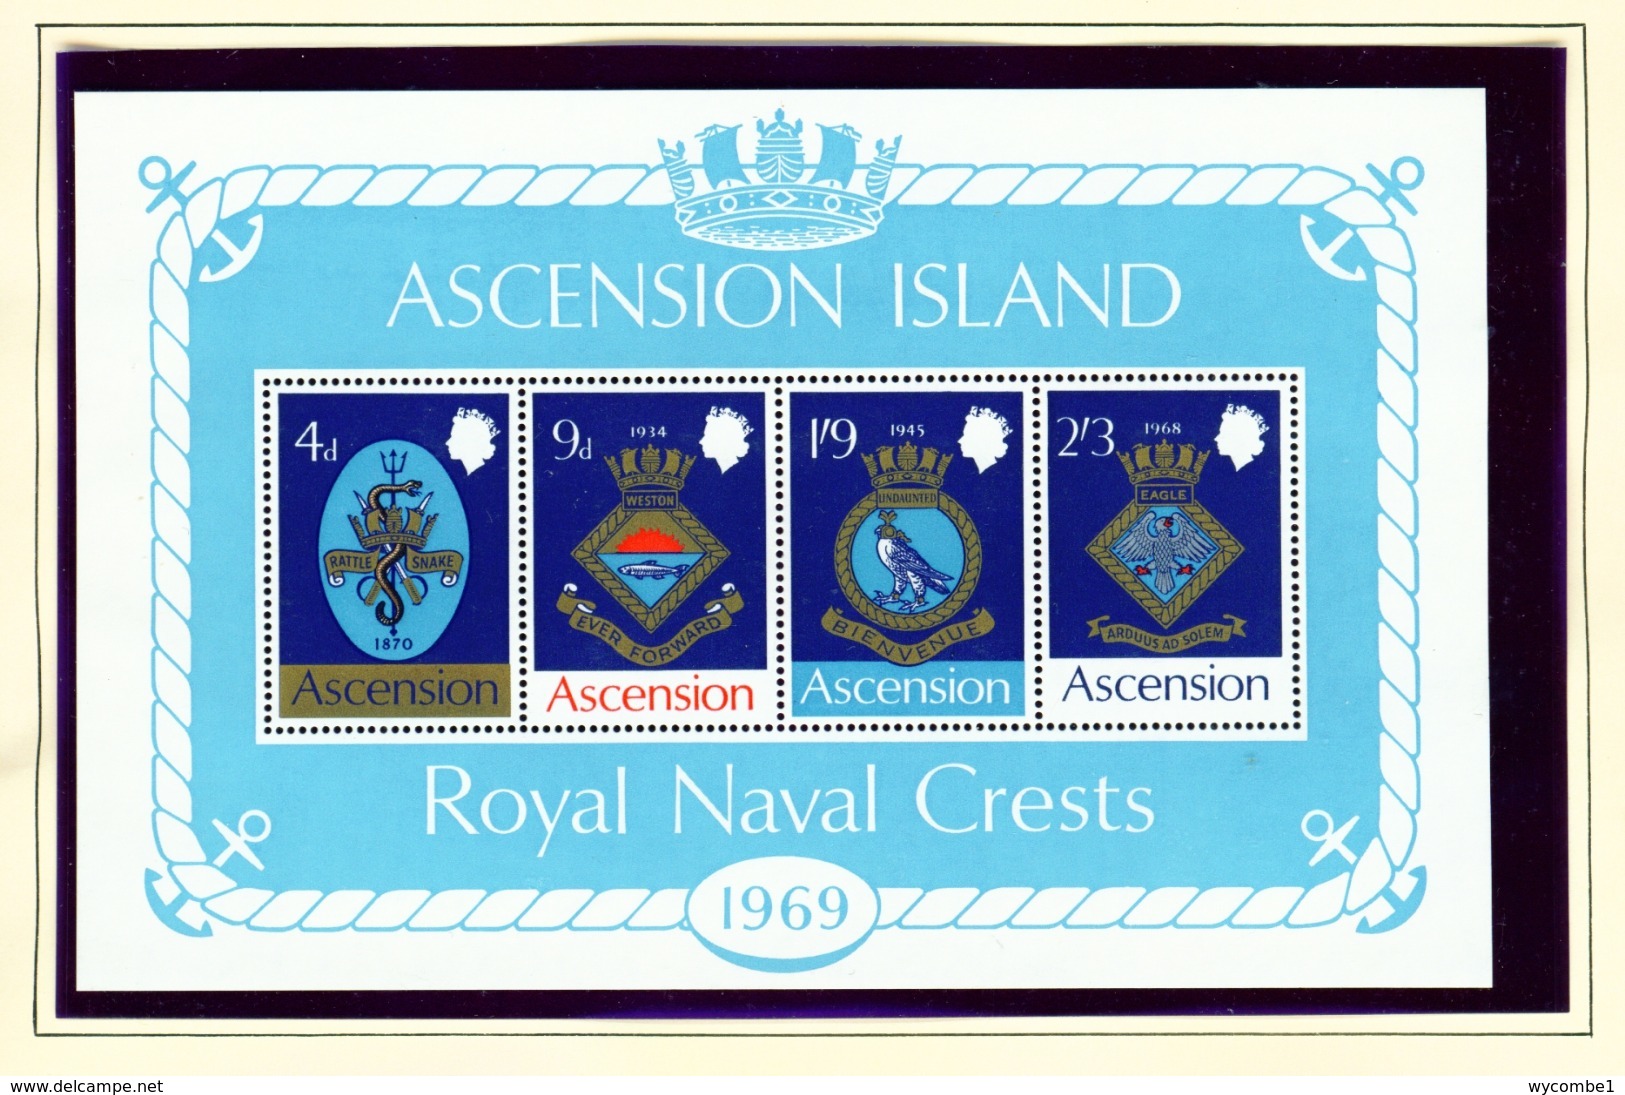 ASCENSION  -  1969 Naval Crests Miniature Sheet Unmounted/Never Hinged Mint - Ascension